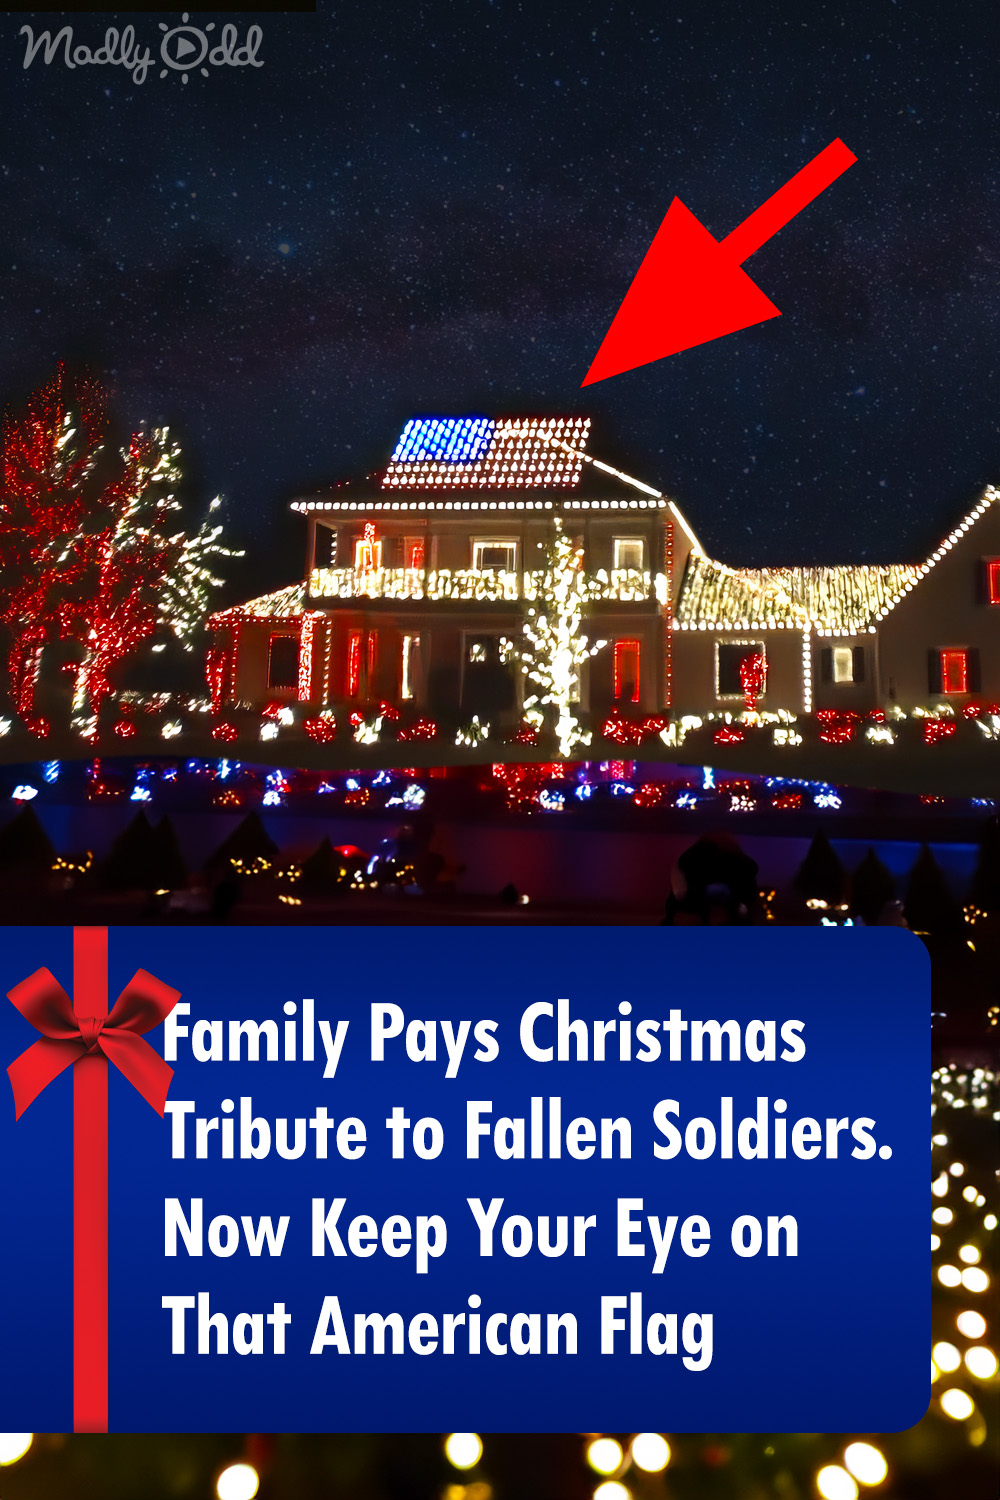 Florida Family Pays Christmas Tribute to Fallen Soldiers. Keep Your Eye on That American Flag